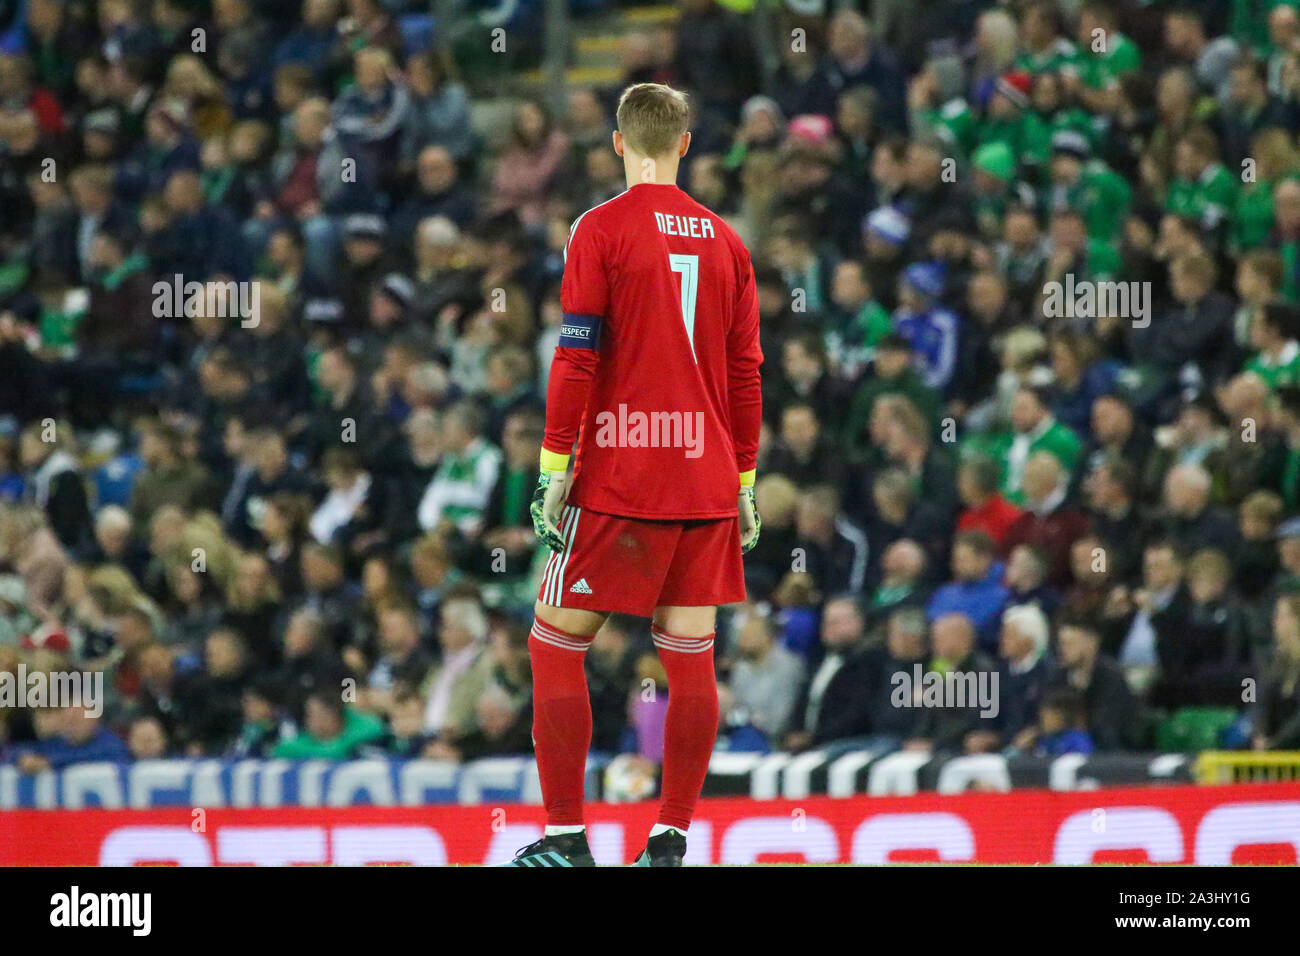 National Football Stadium at Windsor Park, Belfast, Northern Ireland. 09th Sept 2019. UEFA EURO 2020 Qualifier- Group C, Northern Ireland 0 Germany 2. German football international Manuel Neuer (1) playing for Germany in Belfast 2019. Stock Photo